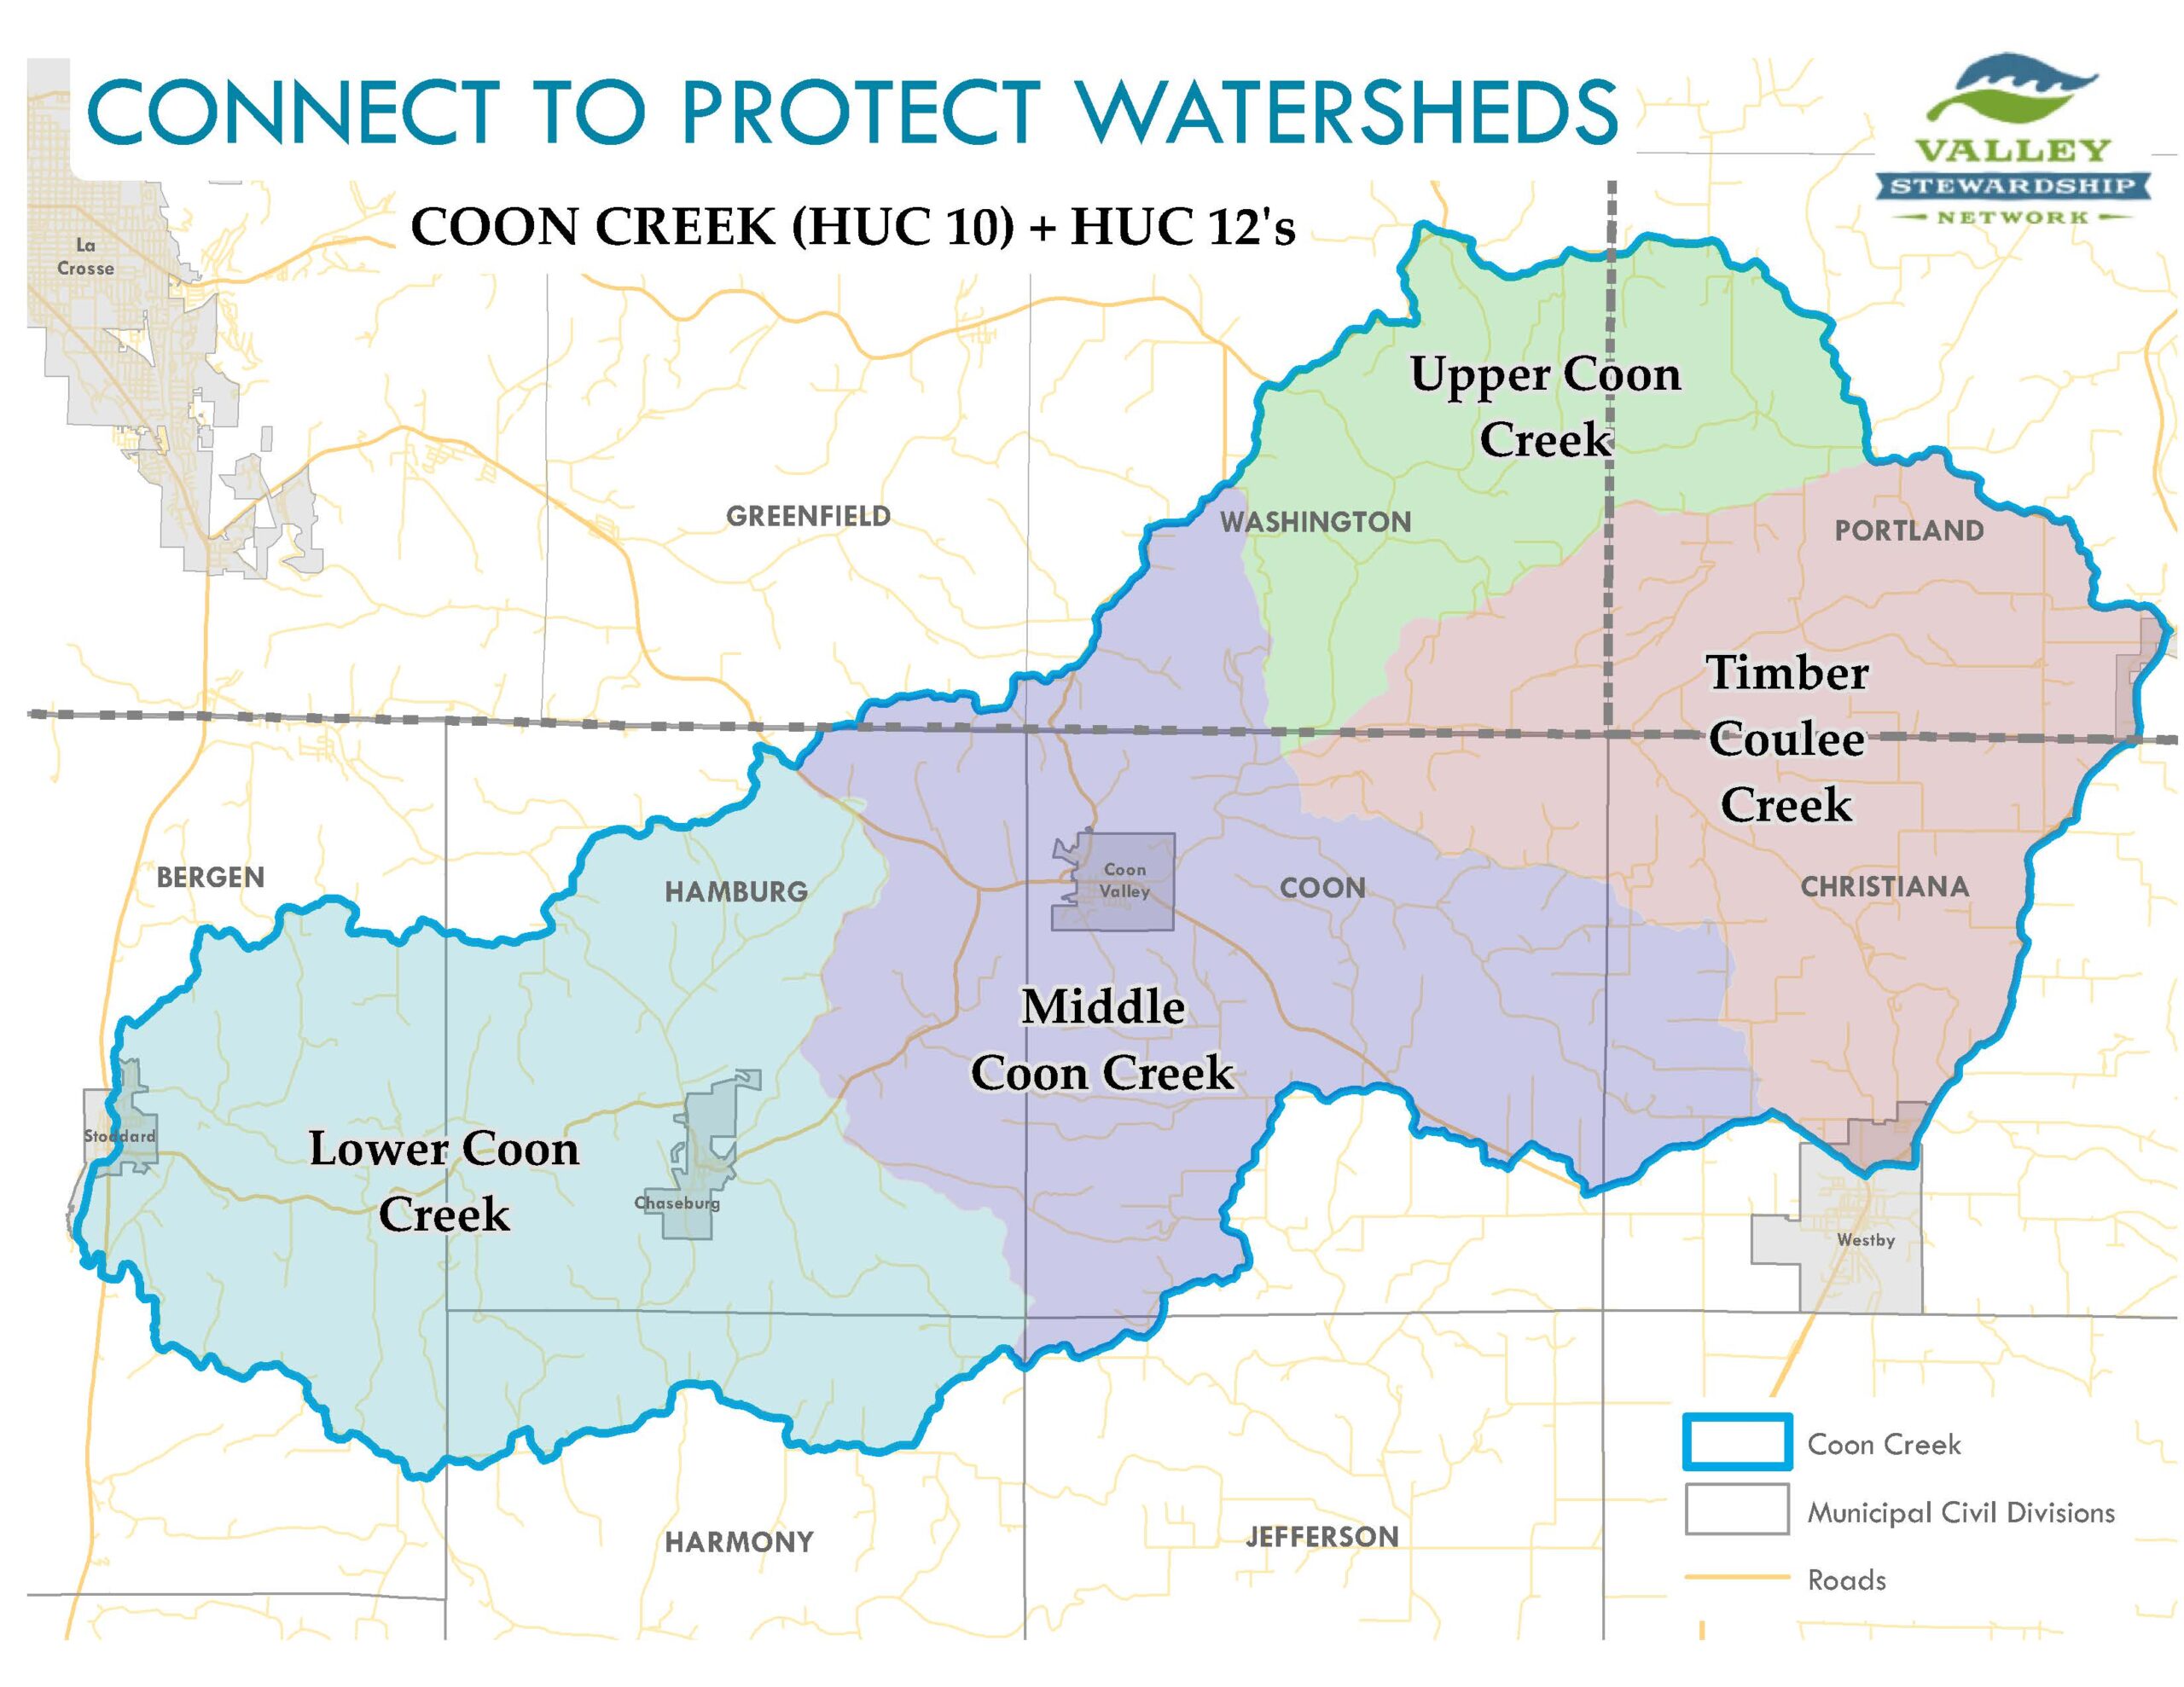 Colored sections of the Coon Creek watershed over a map showing municipalities and roads